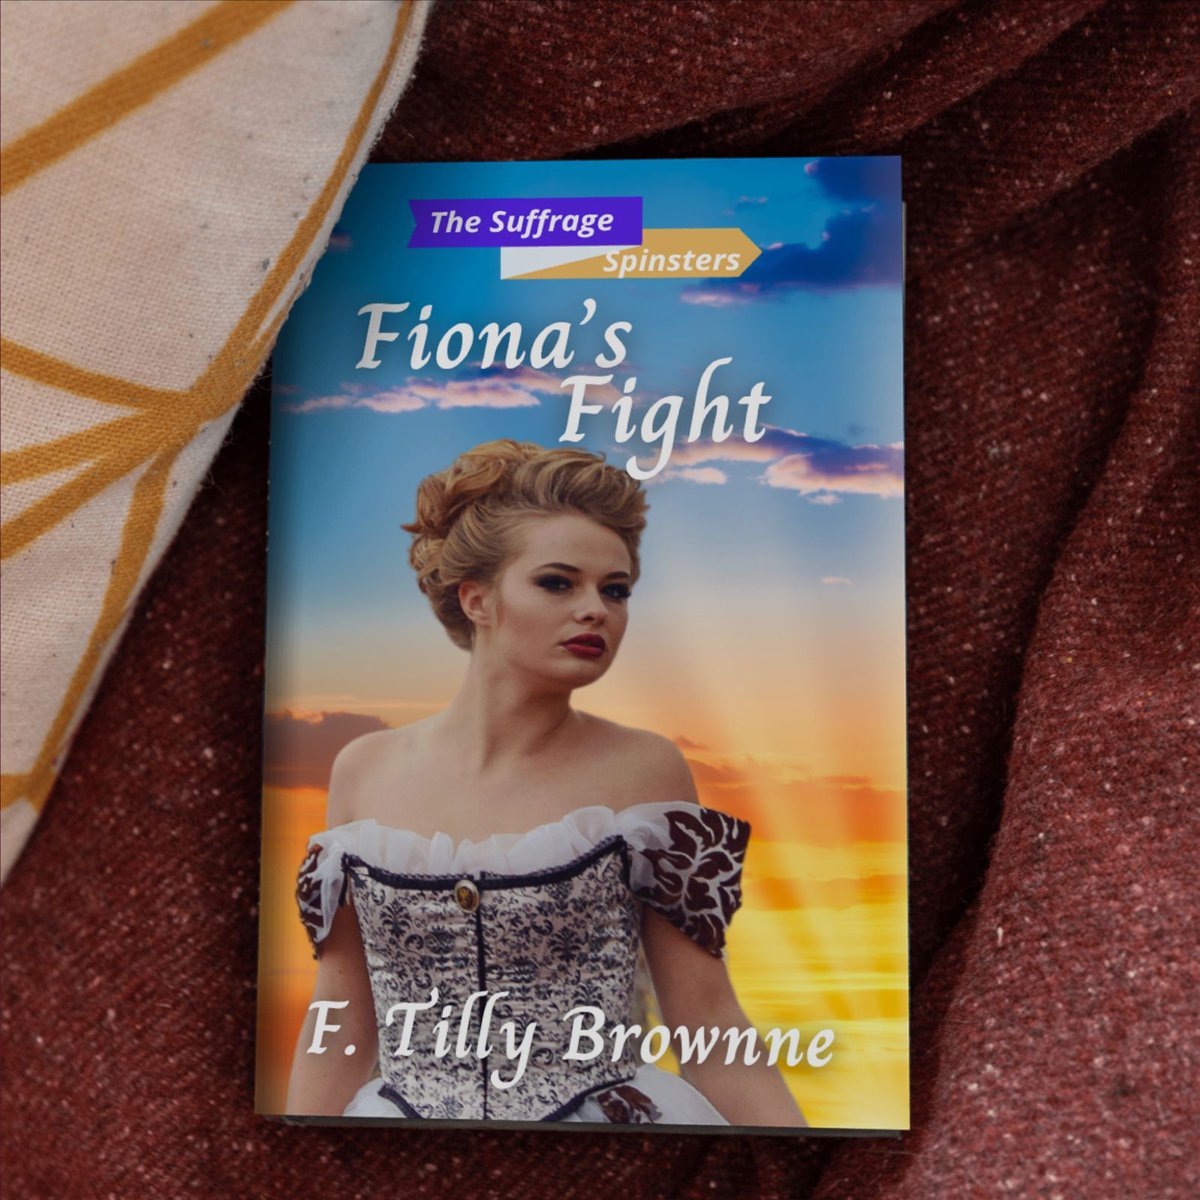 #AmazonPreOrder now! Can Fiona fight to save Preston and his new business and for the vote for woman at the same time? Can God make a way when there seems to be no way? #HistoricalRomance #VoteforWomen buff.ly/496kE9g #IARTG